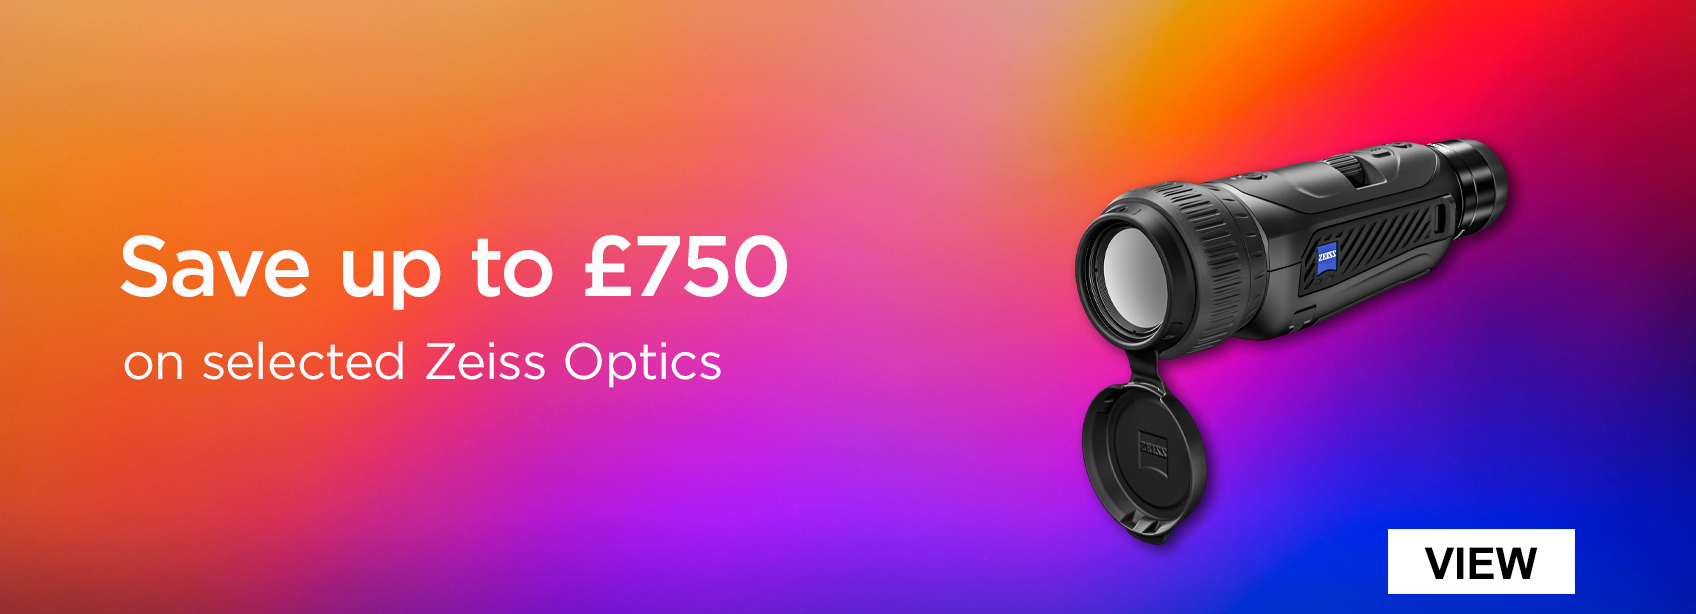 Save up to £750 on selected Zeiss Optics